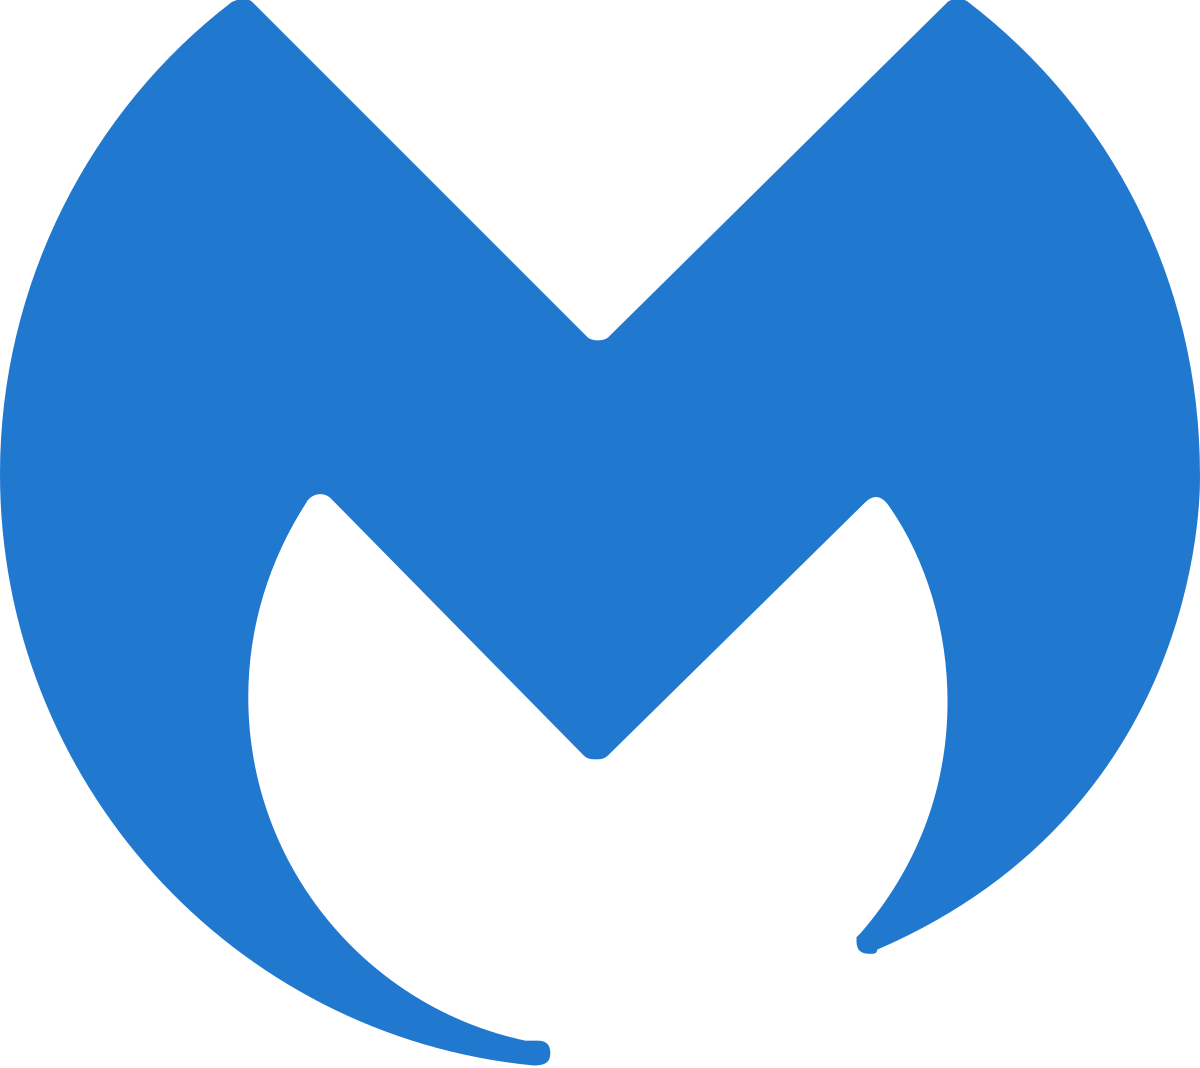 Malwarebytes Endpoint Protection, 1 - 24, 1 Year